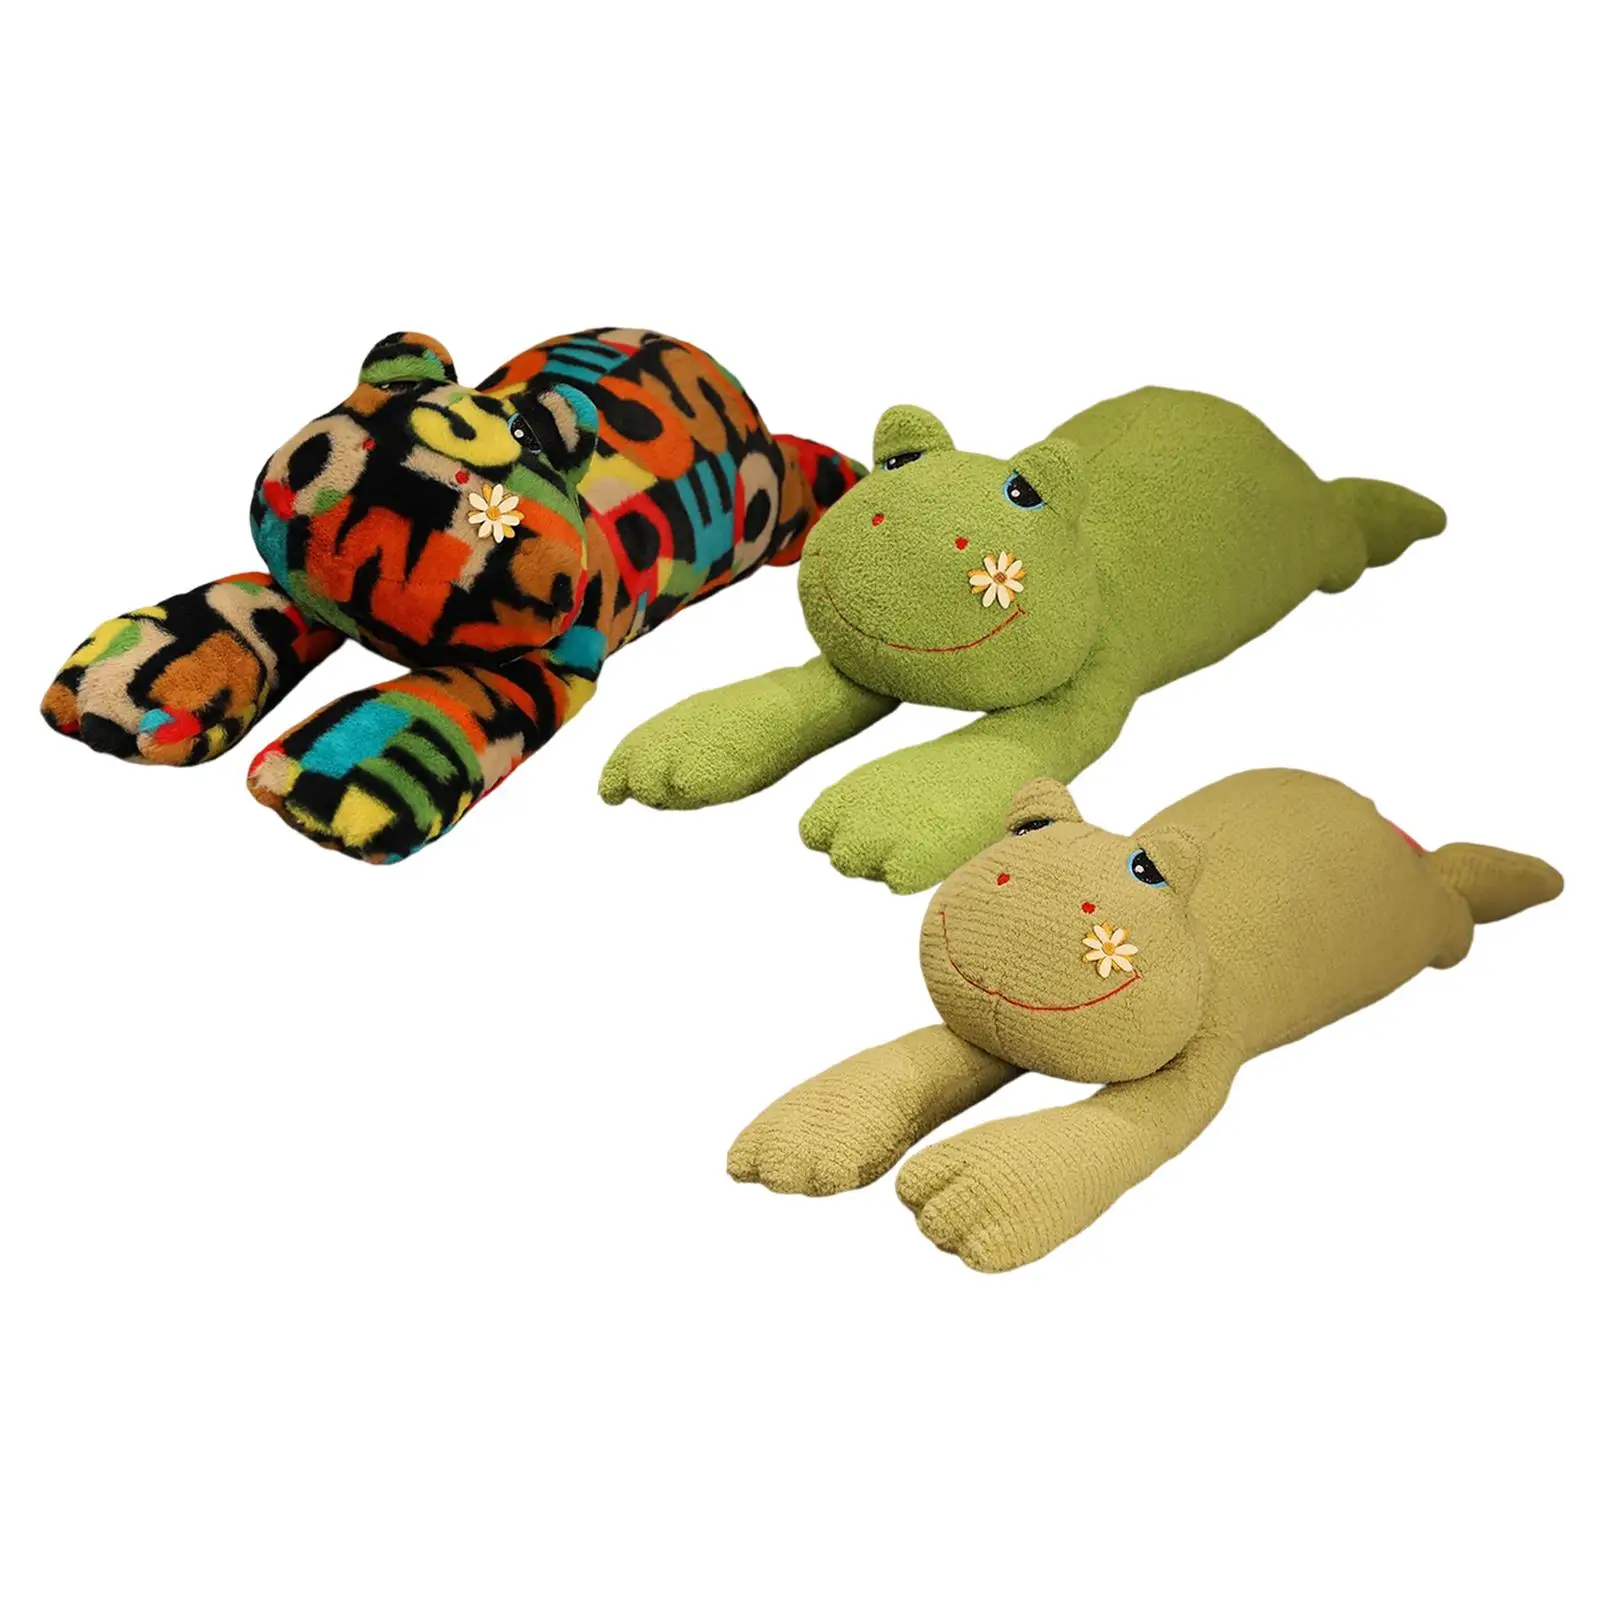 Adorable Frog Plush Doll Cushion Frog Pillow , Soft Stuffed Animal for Birthday Gifts